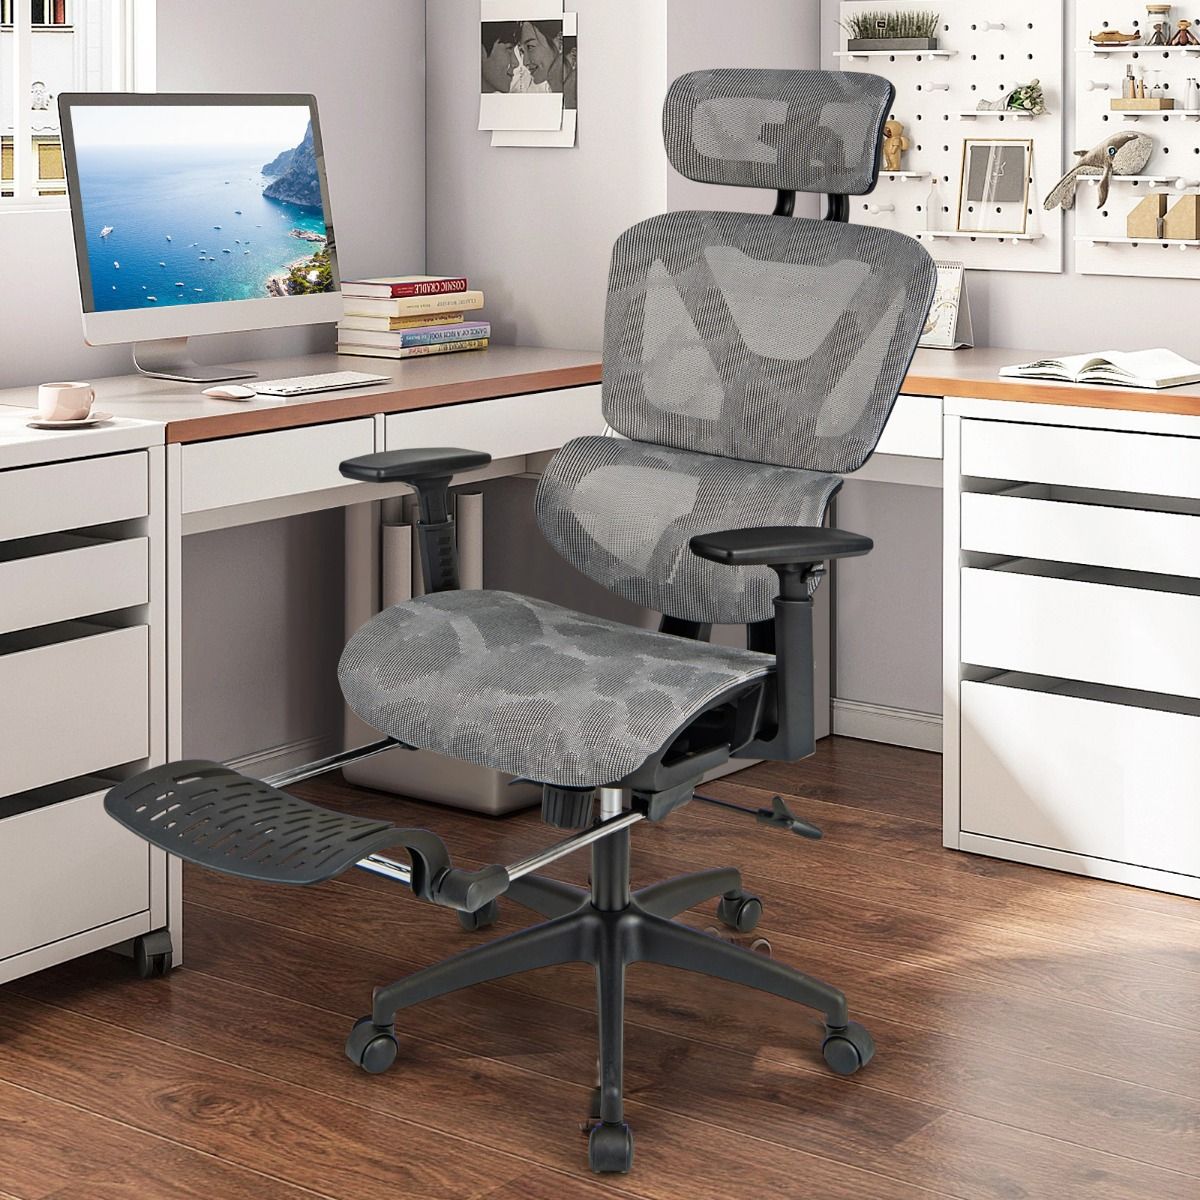 Mesh Office Chair with Retractable Footrest and Waterfall Seat